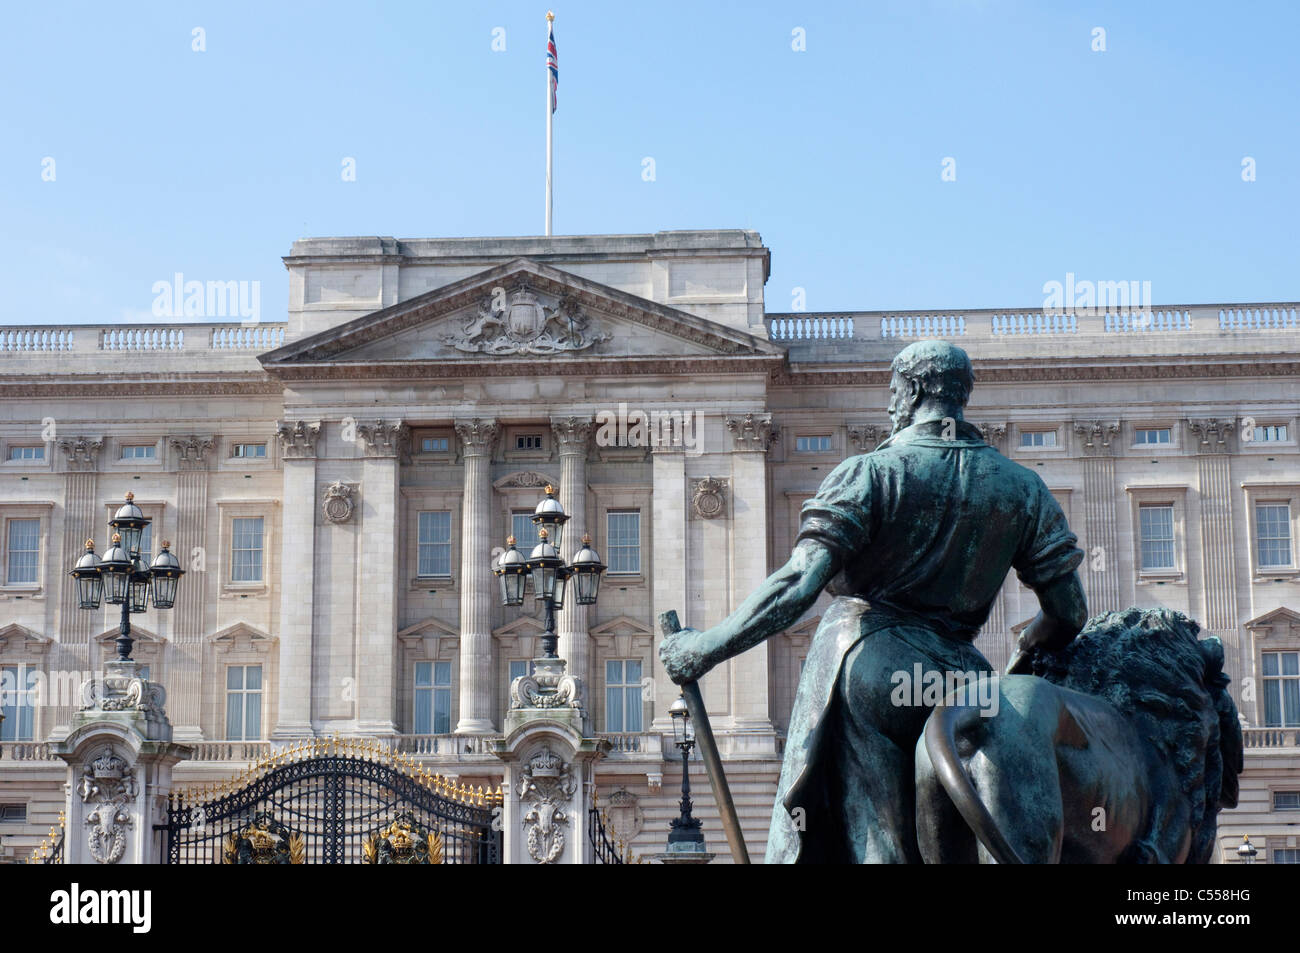 Statue in front of a palace, Buckingham Palace, City of Westminster, London, England Stock Photo